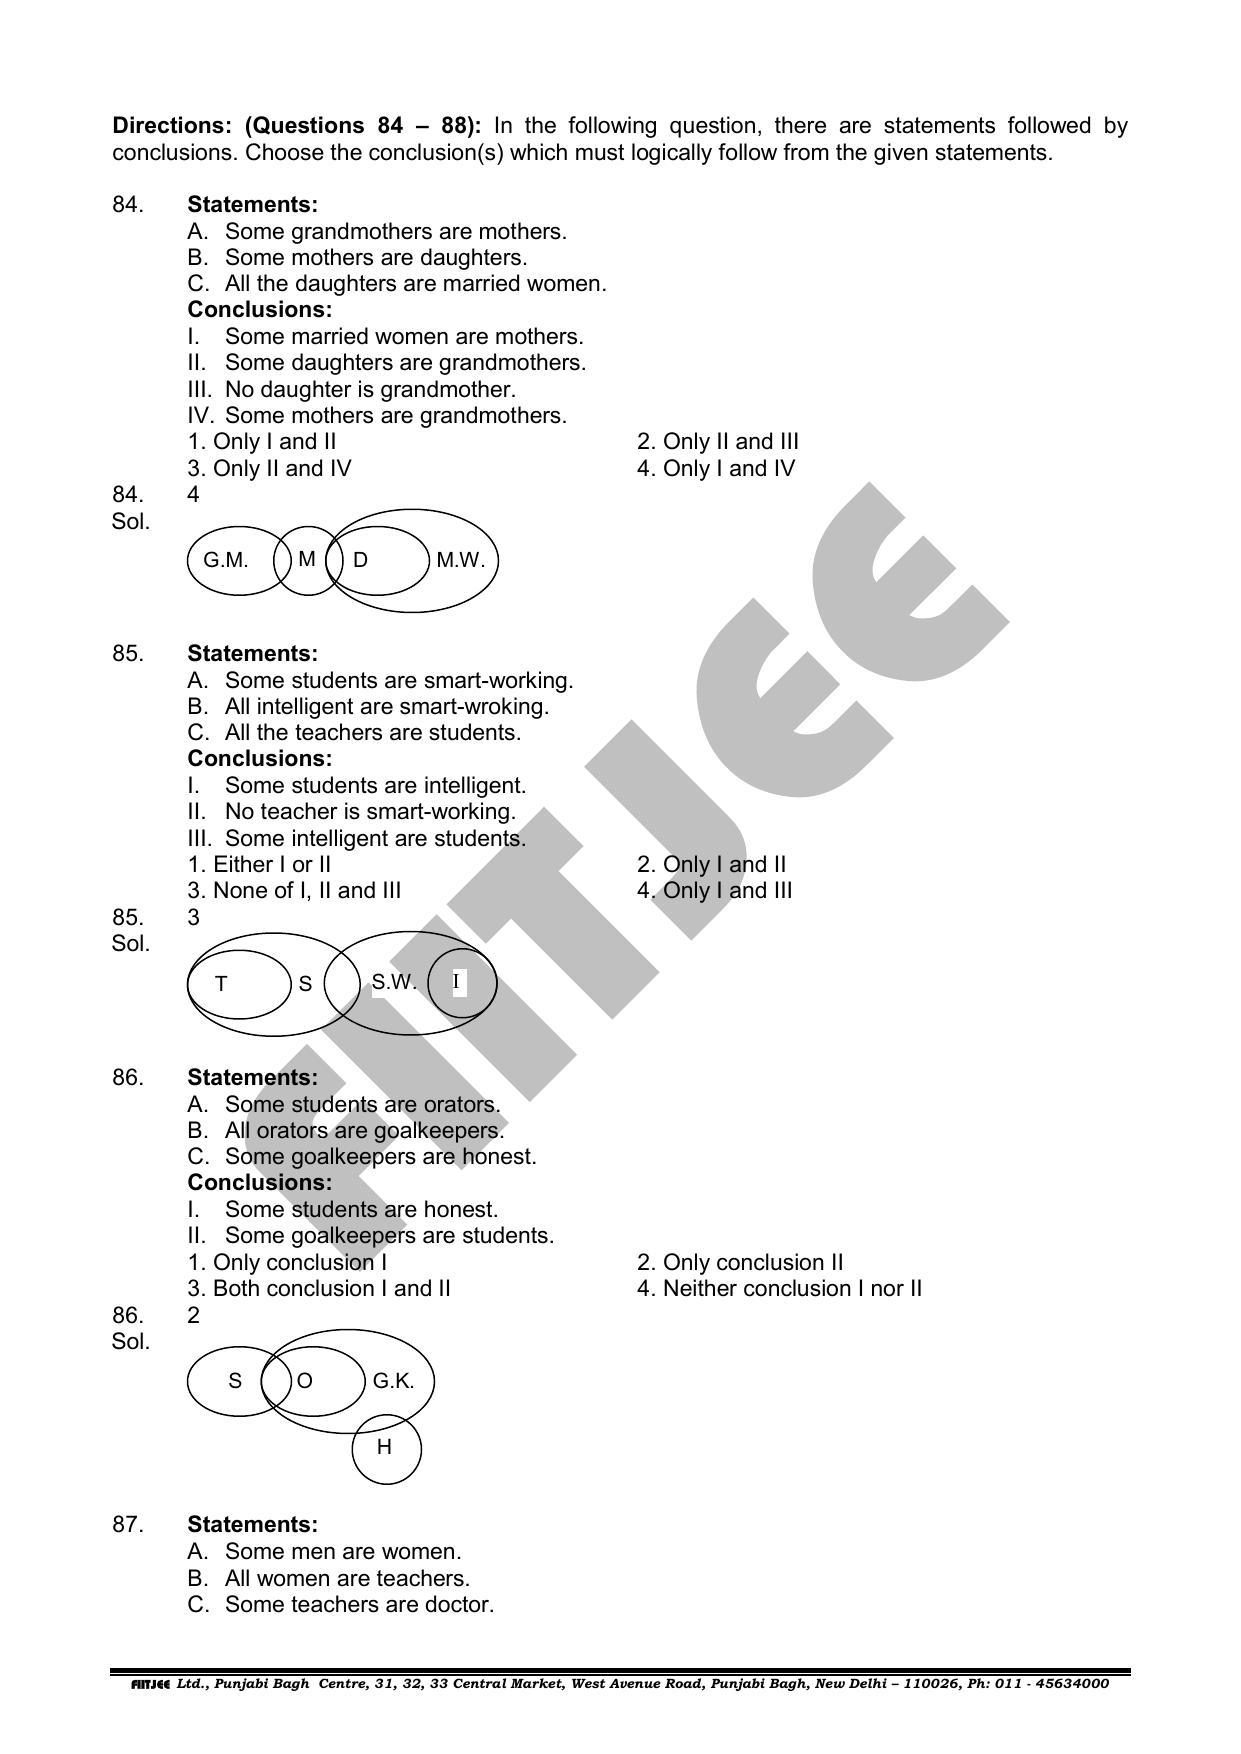 NTSE 2019 (Stage II) MAT Question Paper with Solution (June 16, 2019) - Page 27